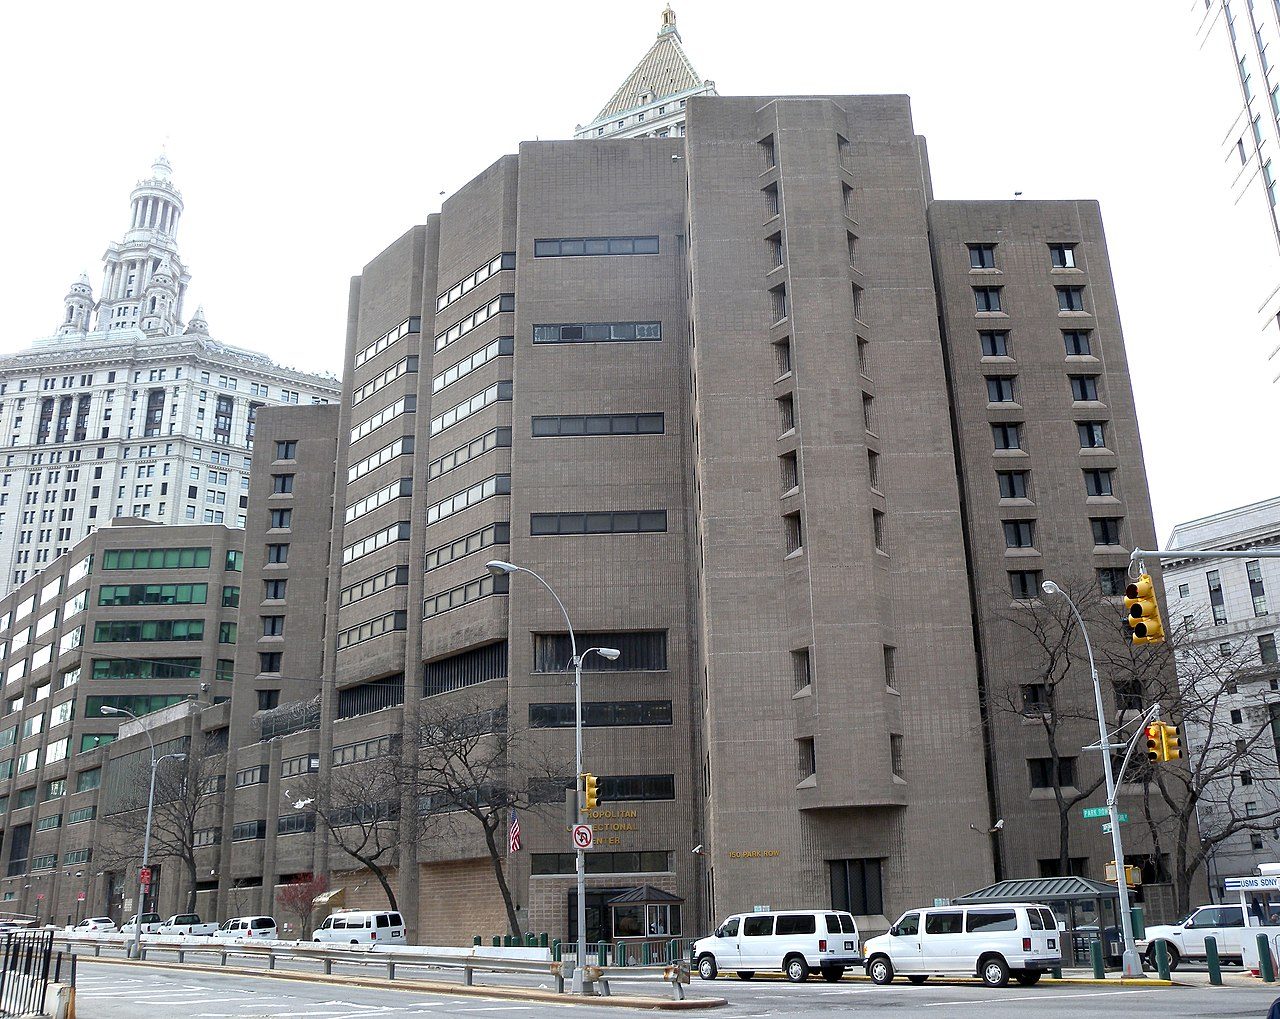 US government to close New York jail where Epstein found hanged – NYT